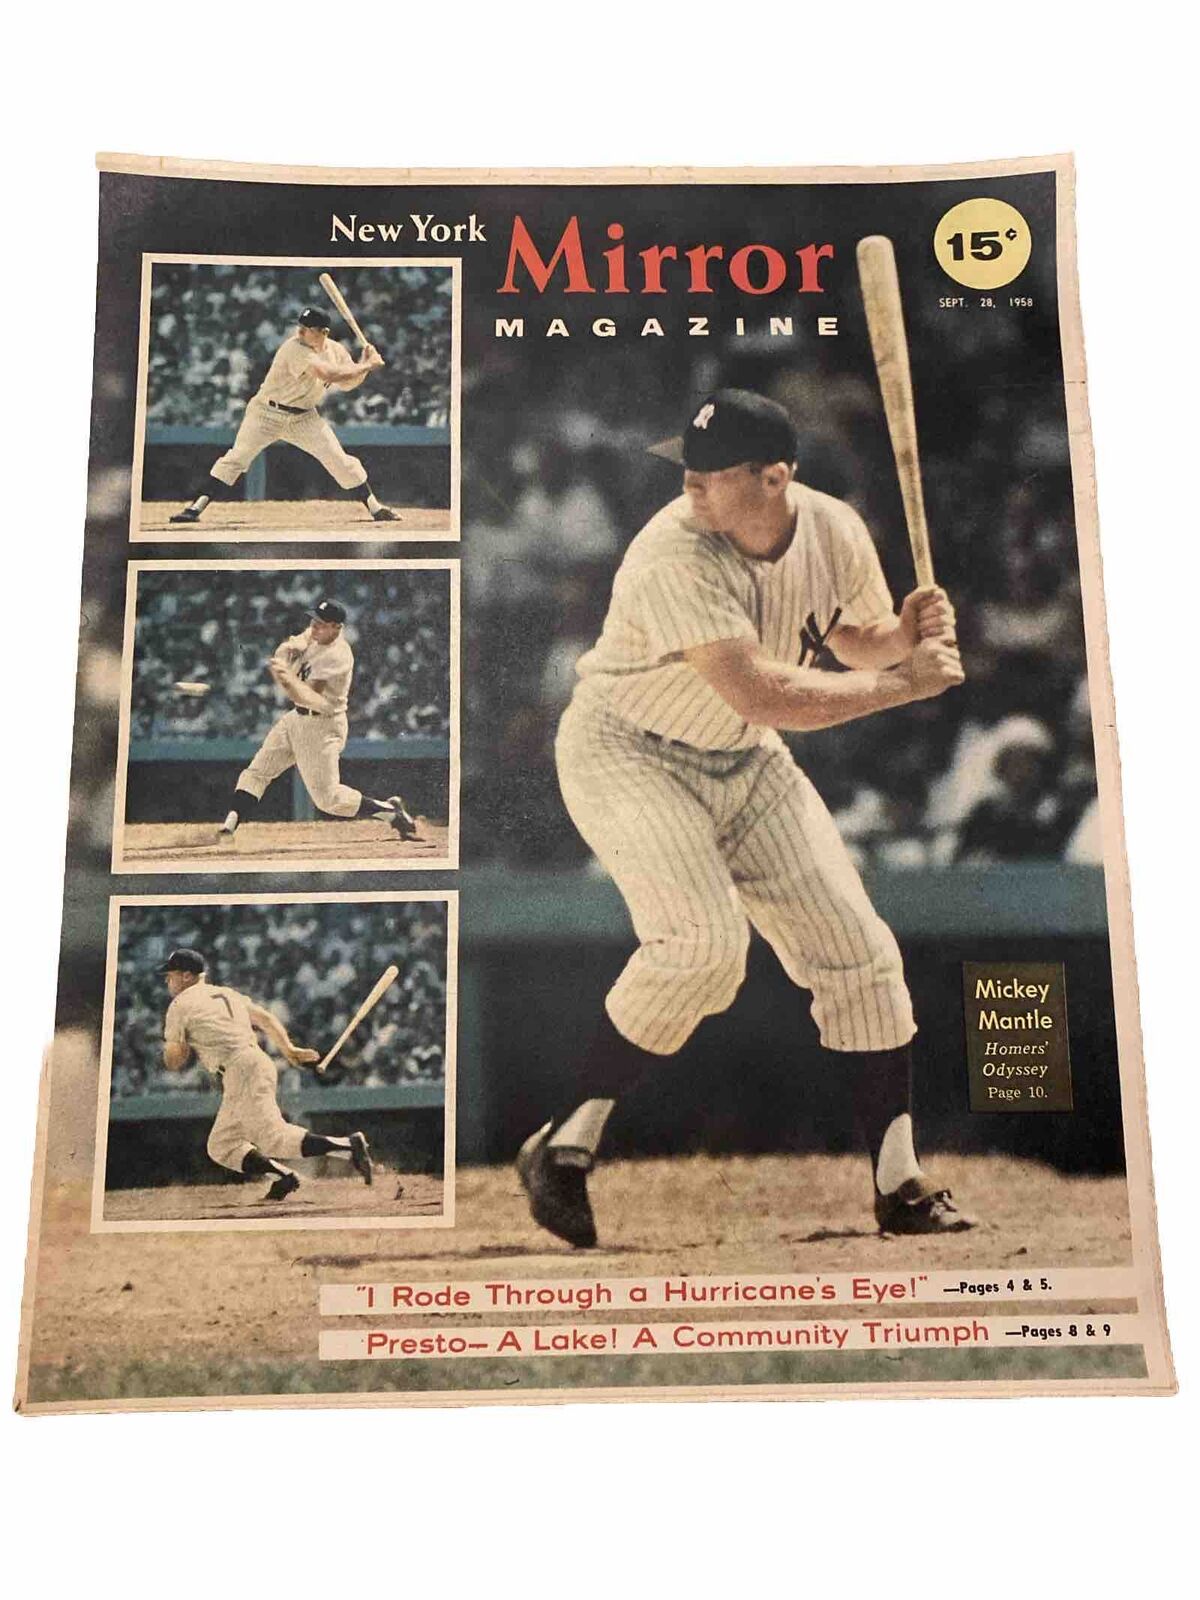 NY New York Mirror Magazine September 28, 1958 Mickey Mantle Yankees on Cover